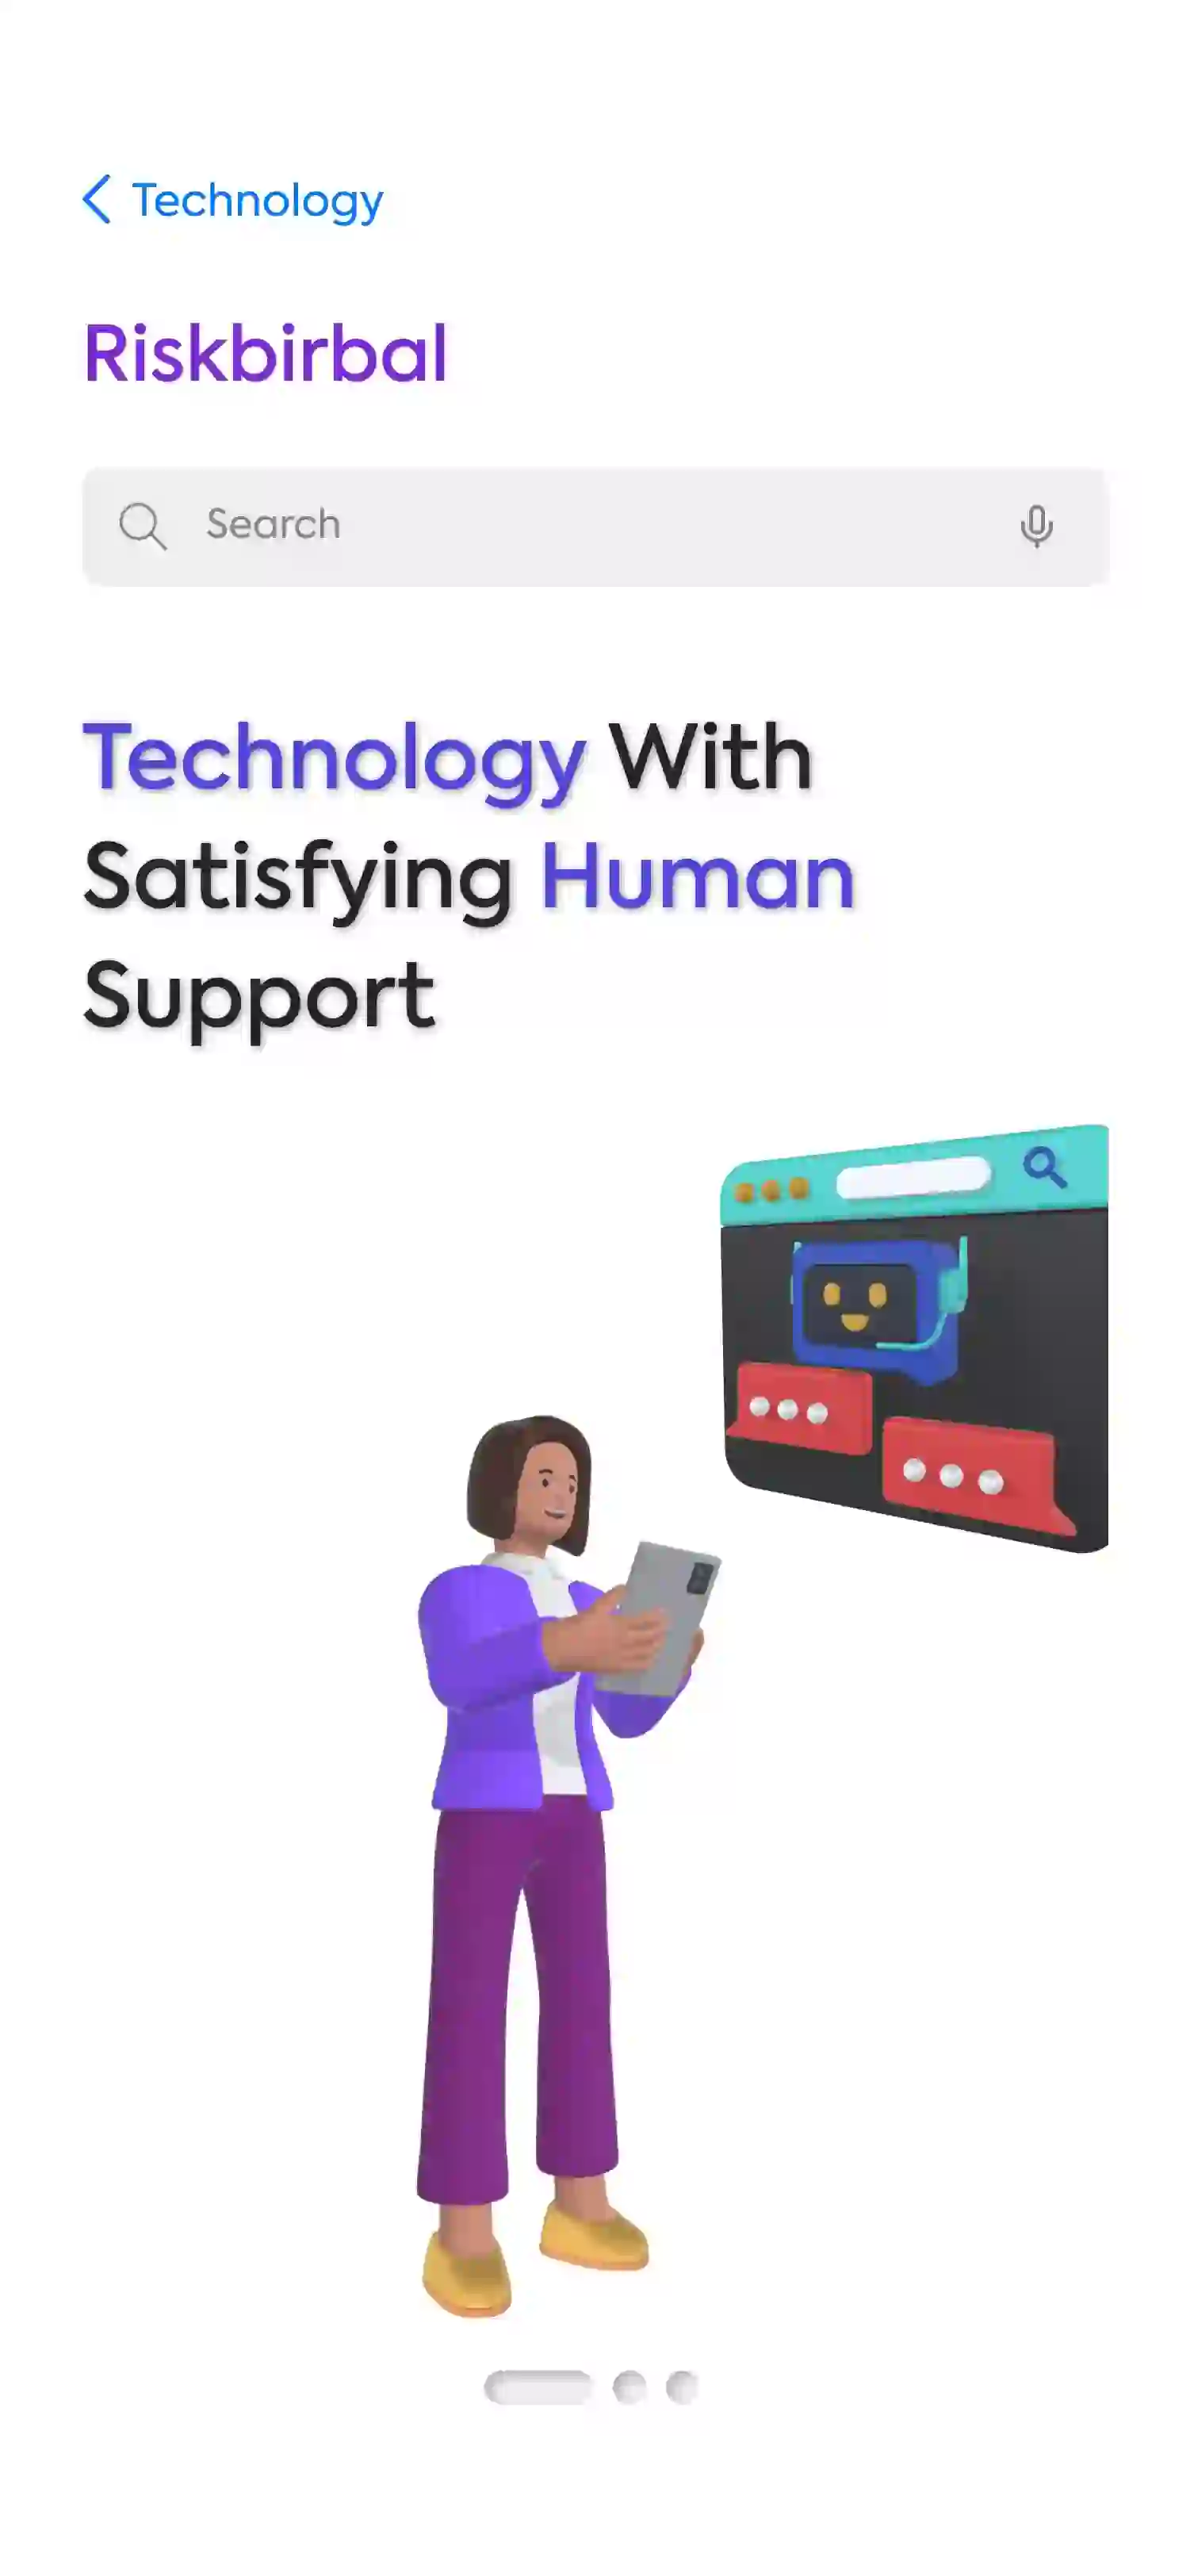 Technology With Satisfying Human Support